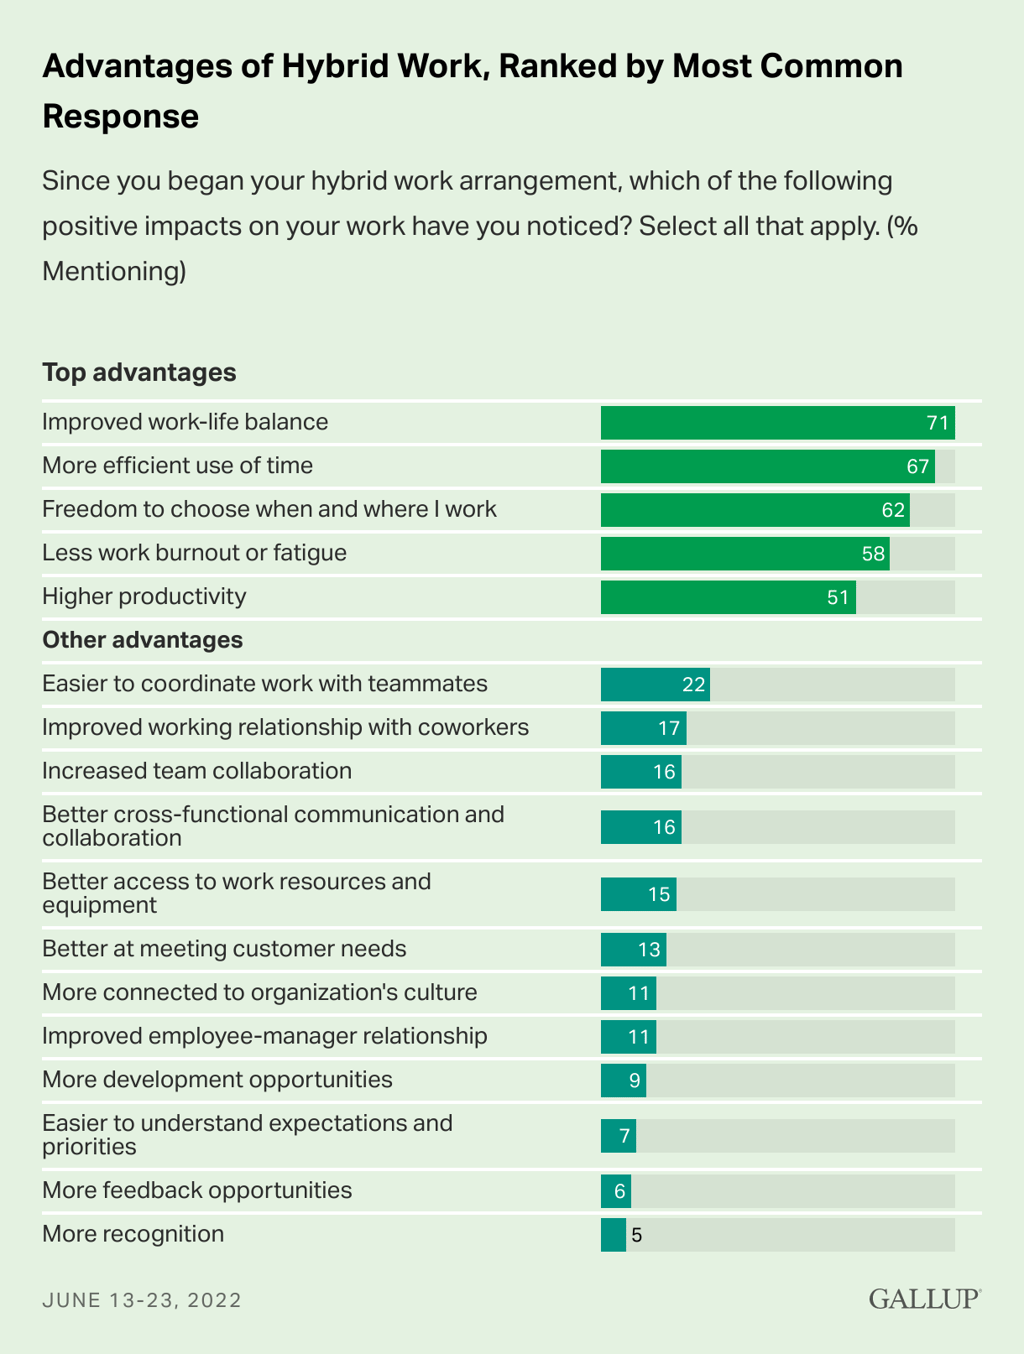 gallup-advantages-of-hybrid-work-ranked-by-most-common-response